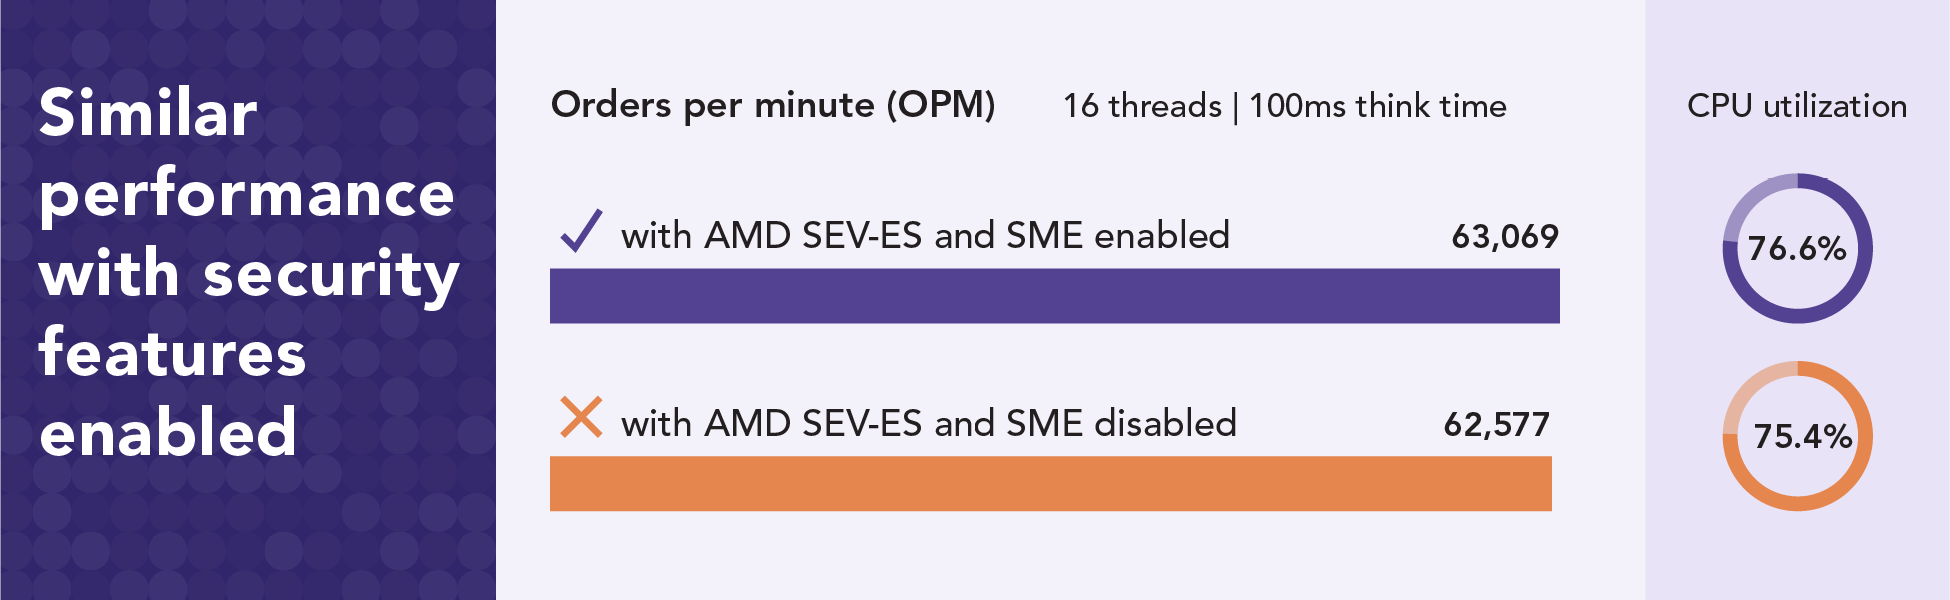 Similar performance with security features enabled. Orders per minute (OPM) at 16 threads and with 100ms think time. The configuration with AMD SEV ES and SME enabled supported 63,069 OPM, and the configuration with AMD SEV ES and SME disabled supported 62,577 OPM. CPU utilization for the configuration with AMD SEV ES and SME enabled was 76.6 percent, and CPU utilization for the configuration with AMD SEV ES and SME disabled was 75.4 percent.